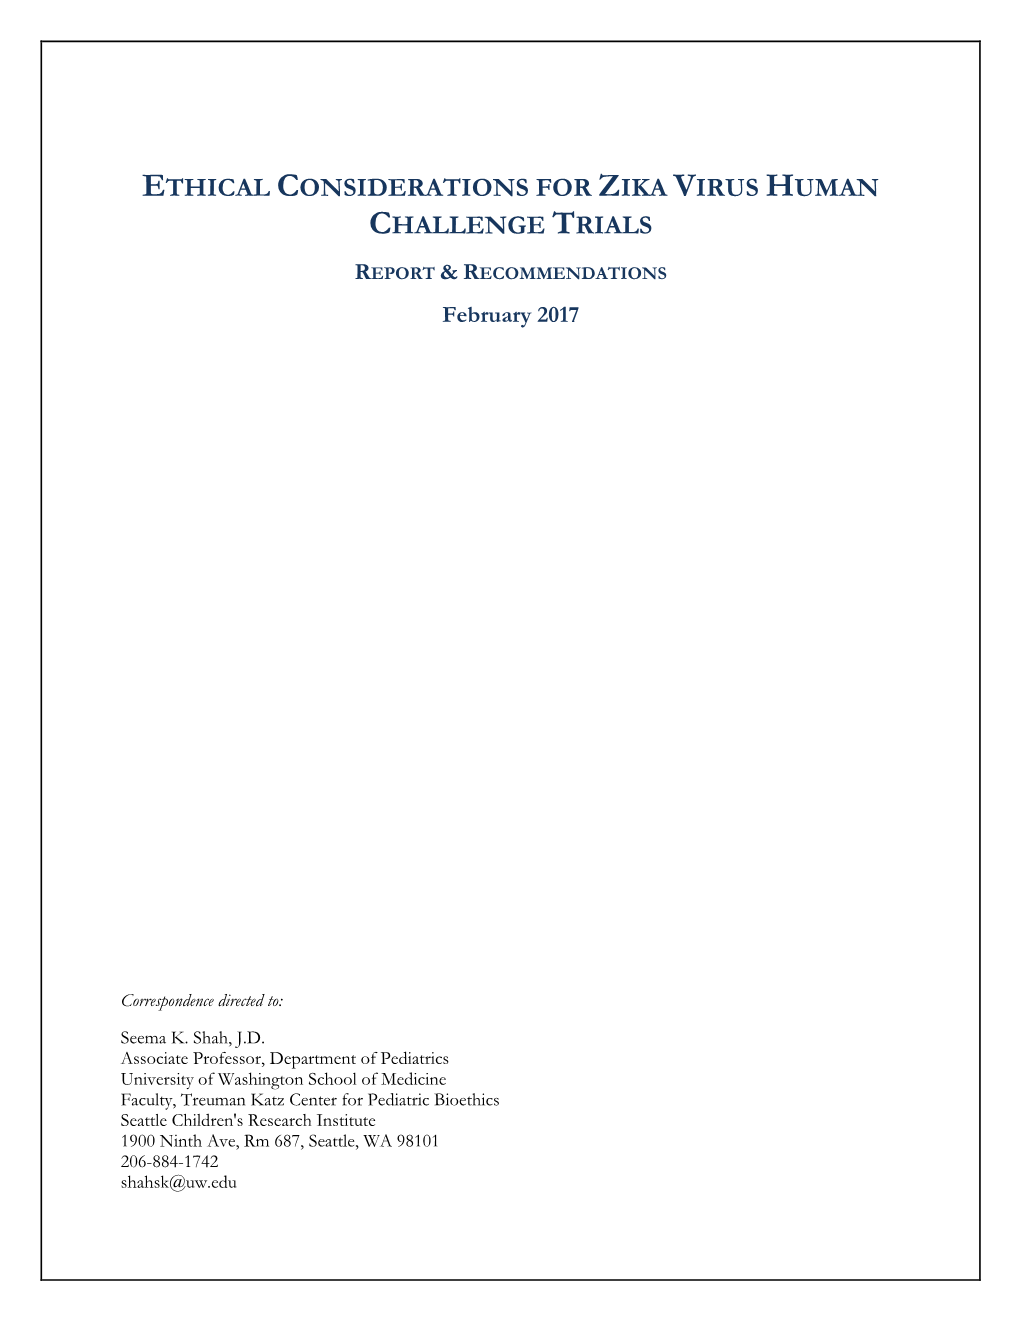 Ethical Considerations for Zika Virus Human Challenge Trials